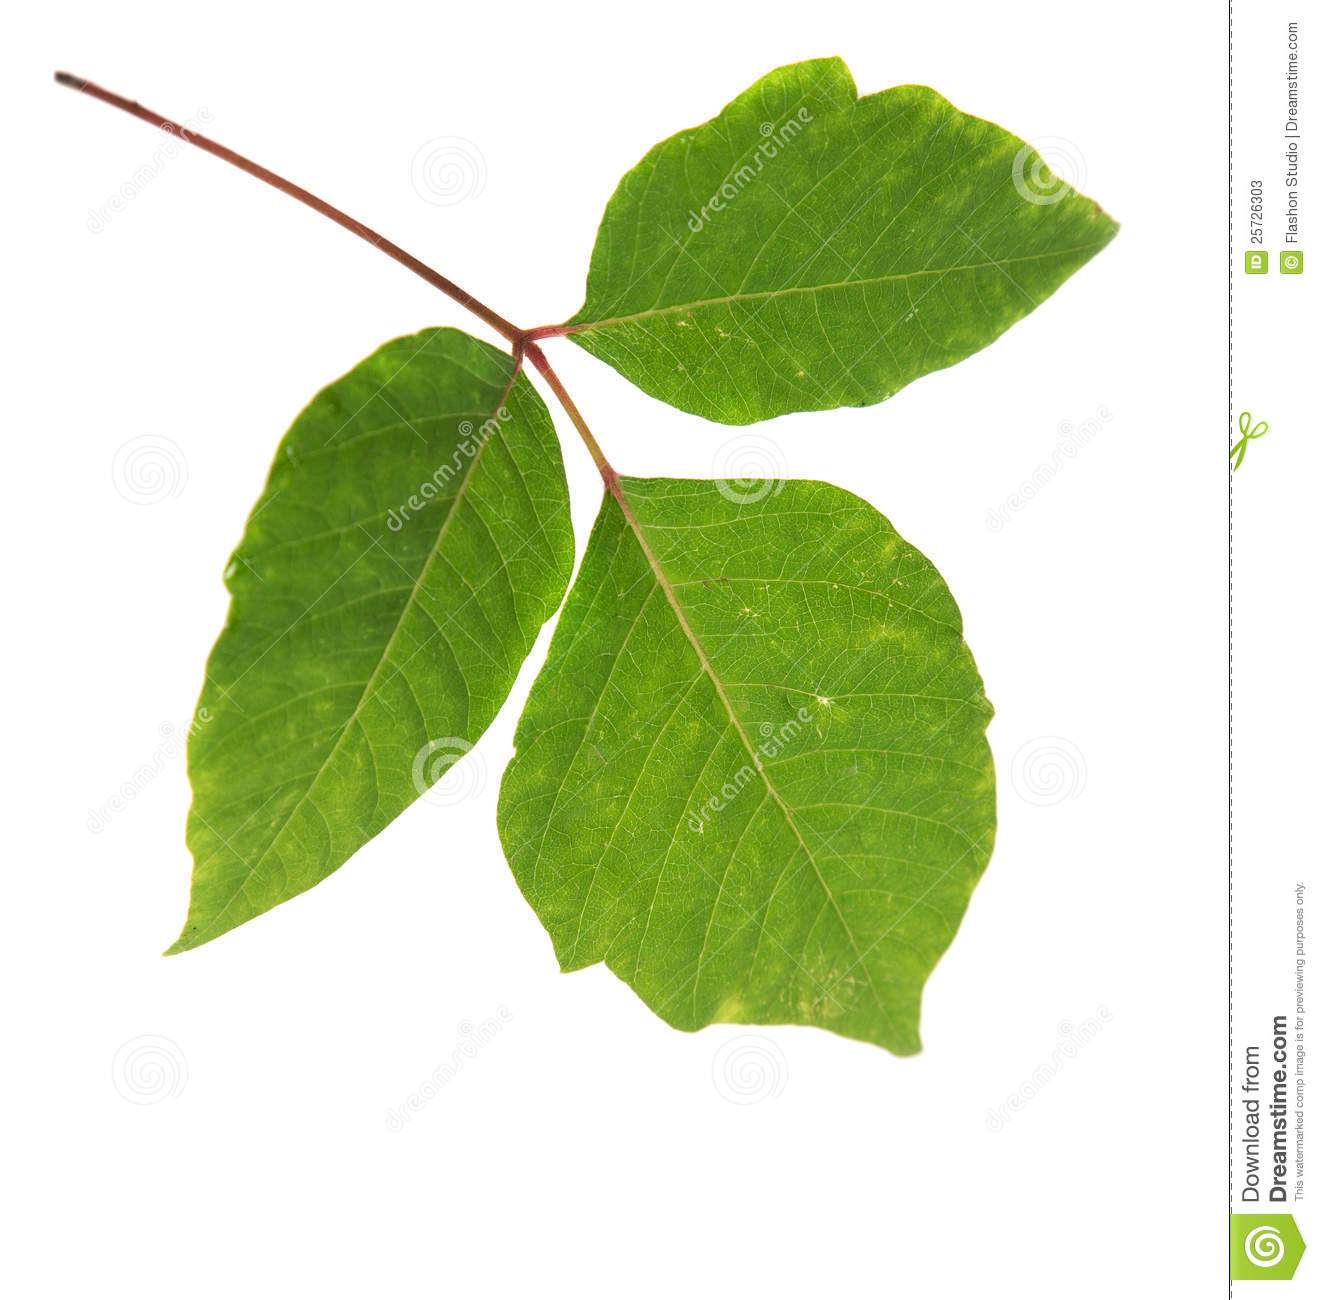 Three Leaves Poison Ivy Isolated Stock Photos   Image  25726303